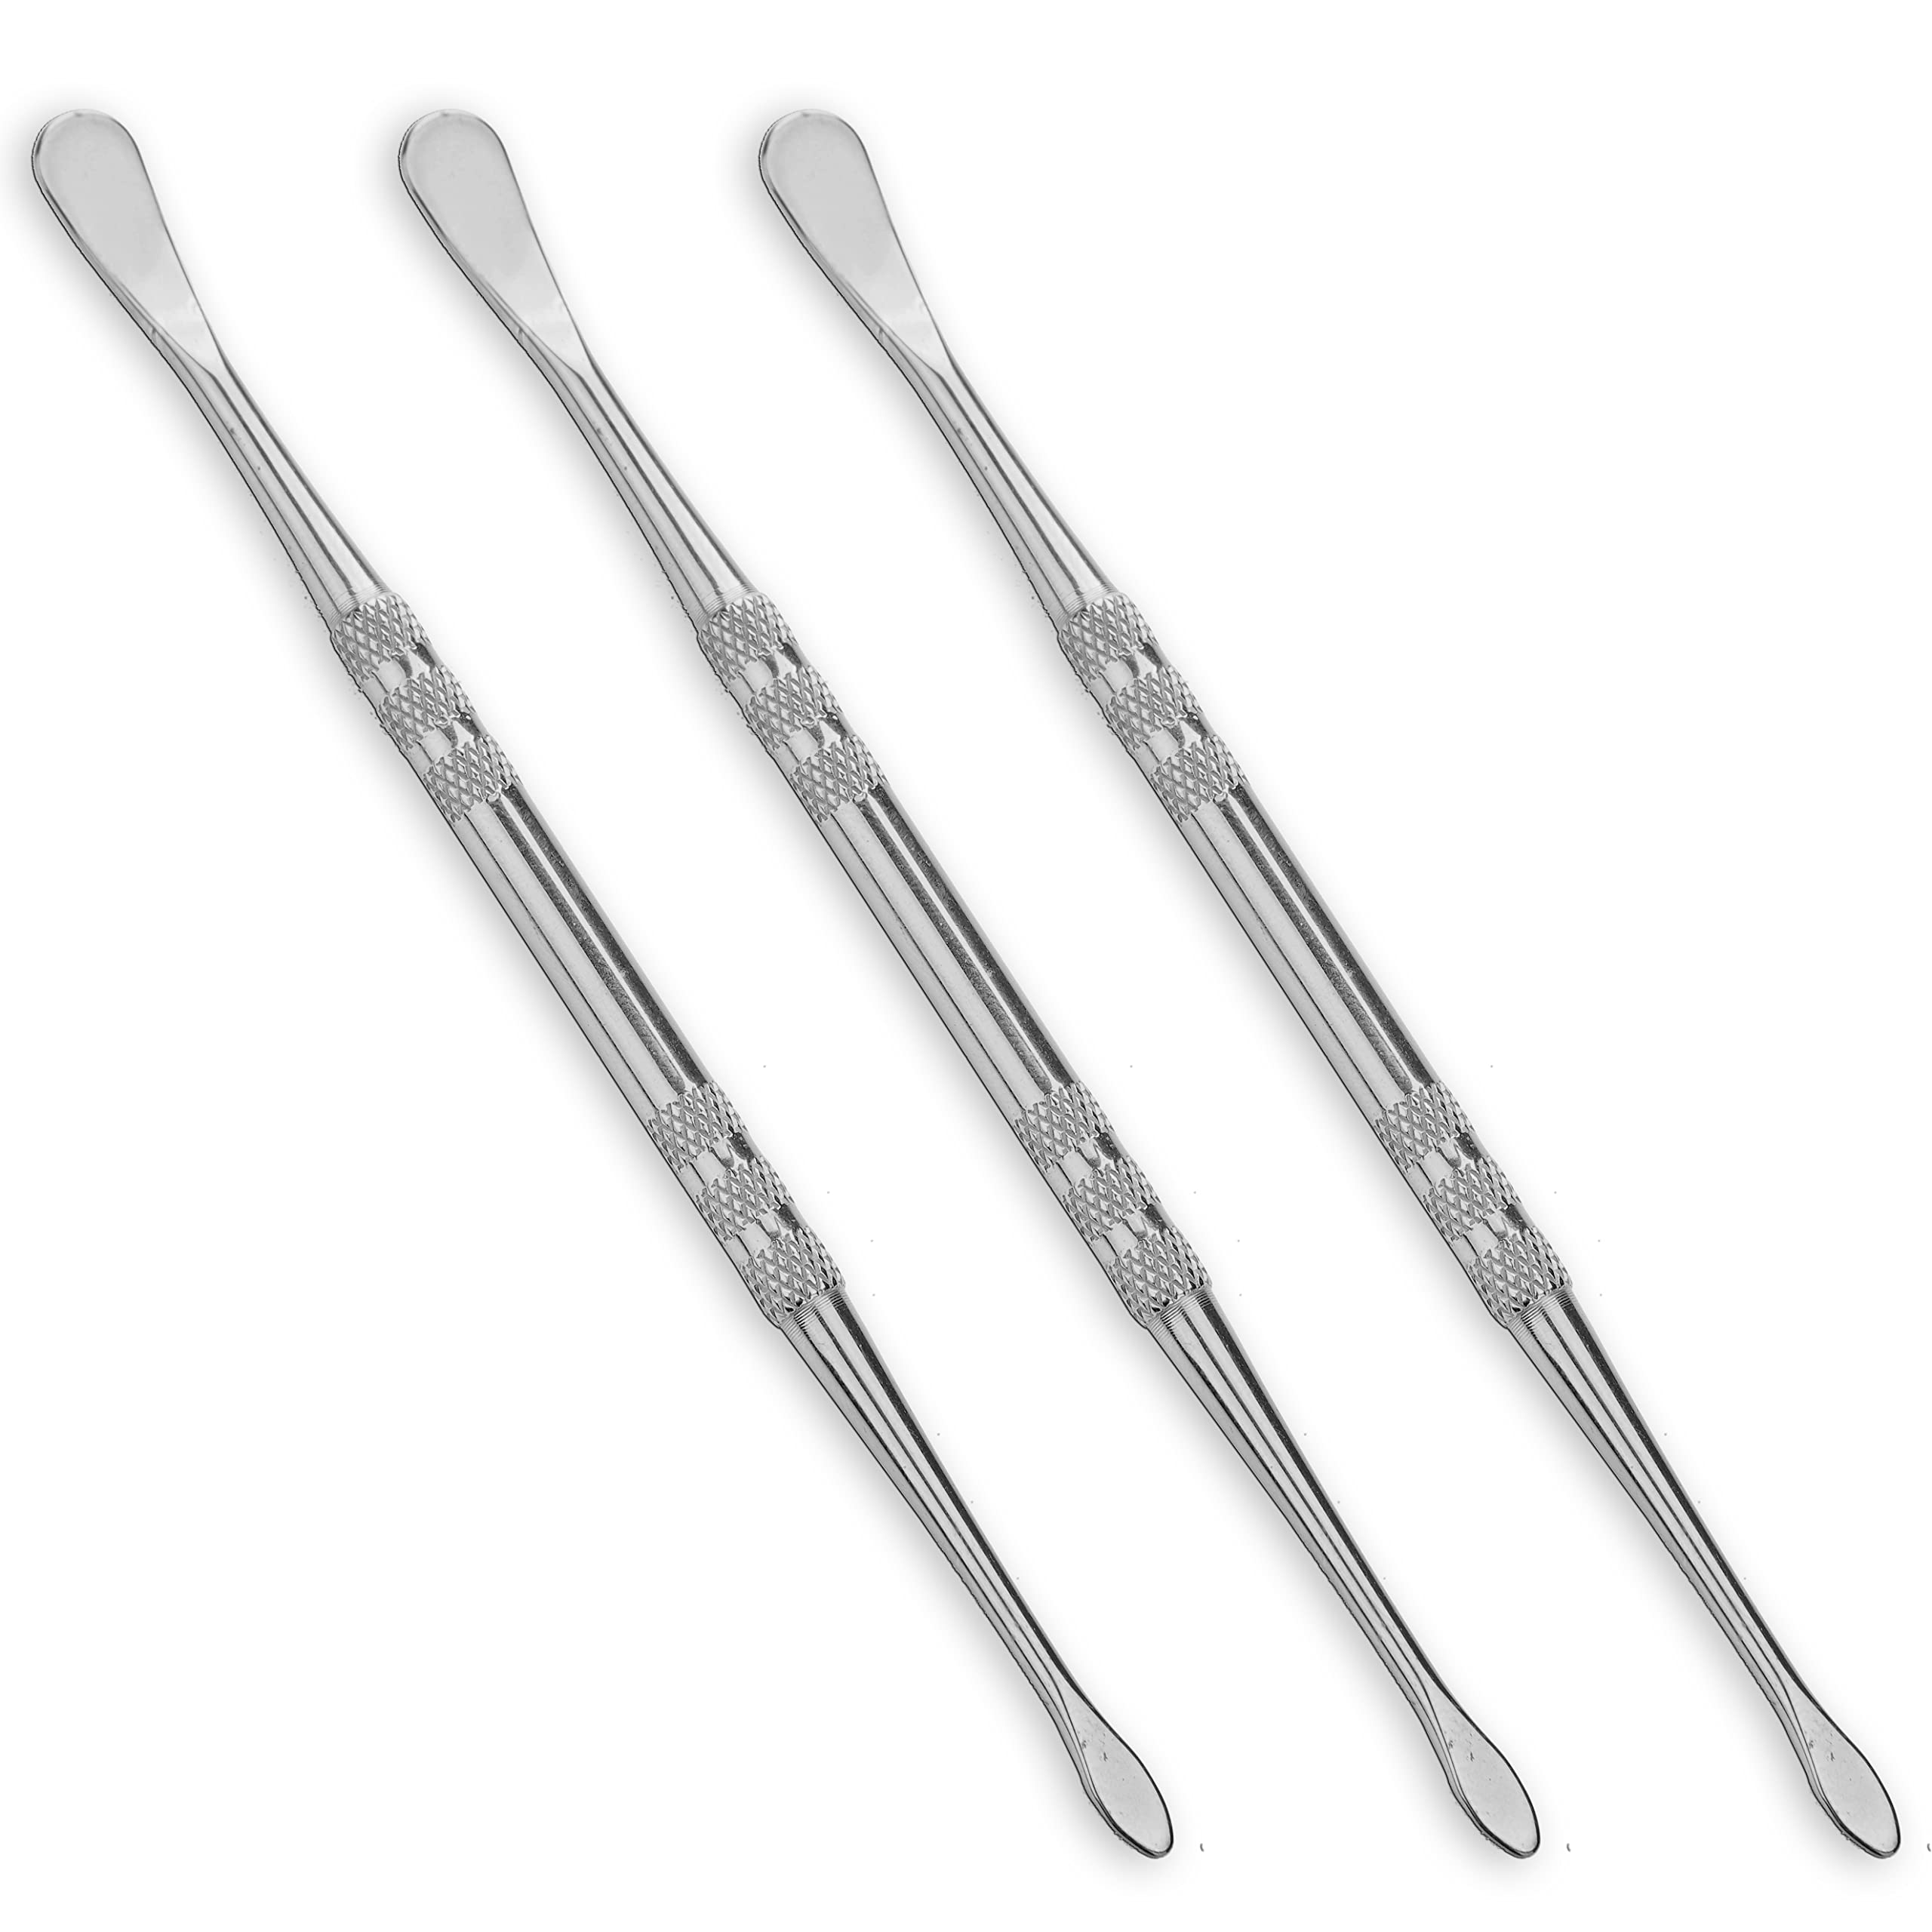 Artizona Wax Carving Tools Pack of 3 - Heat Resistant Stainless Steel  Silver Wax Carving Tools Perfect